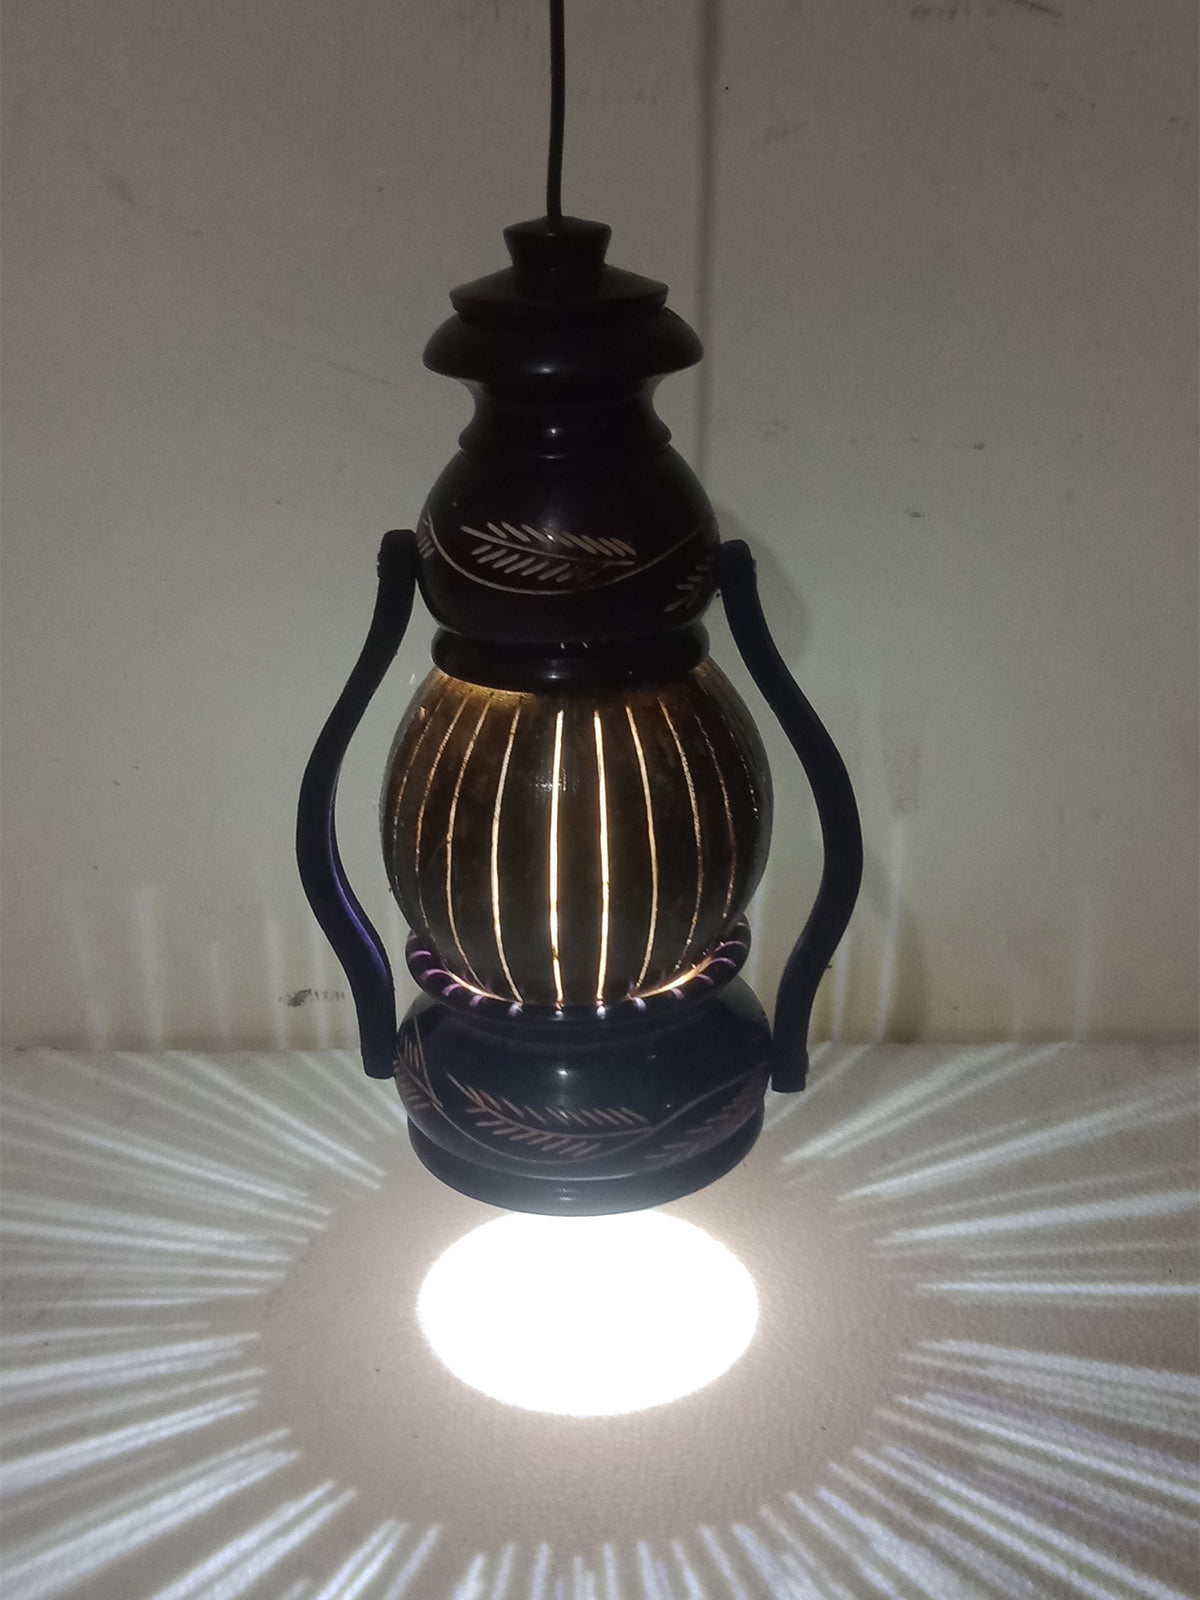 Coconut Shell Made Handcrafted Hurricane Lamp Shade